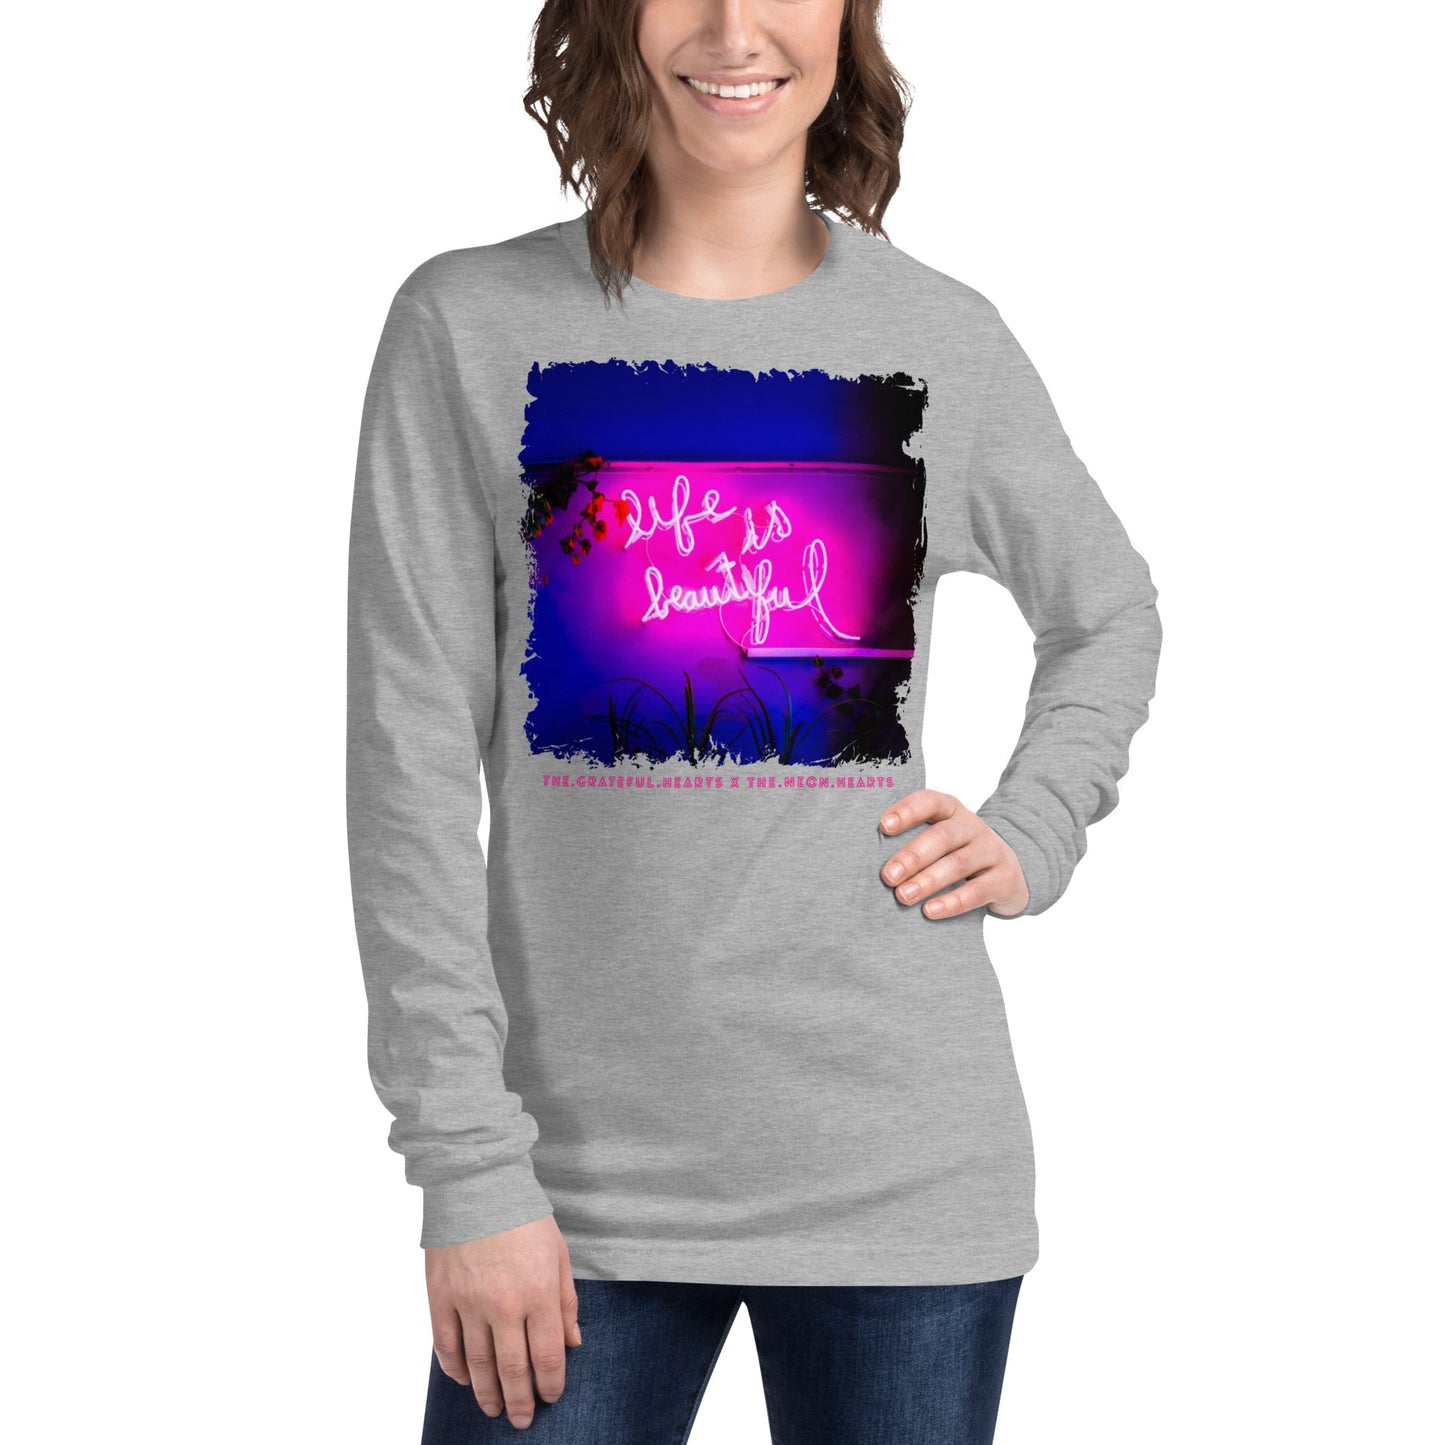 Life is Beautiful ❤️ - Unisex Long Sleeve t-shirt (Available in Various Colors 💖💙💜) - The Grateful Hearts